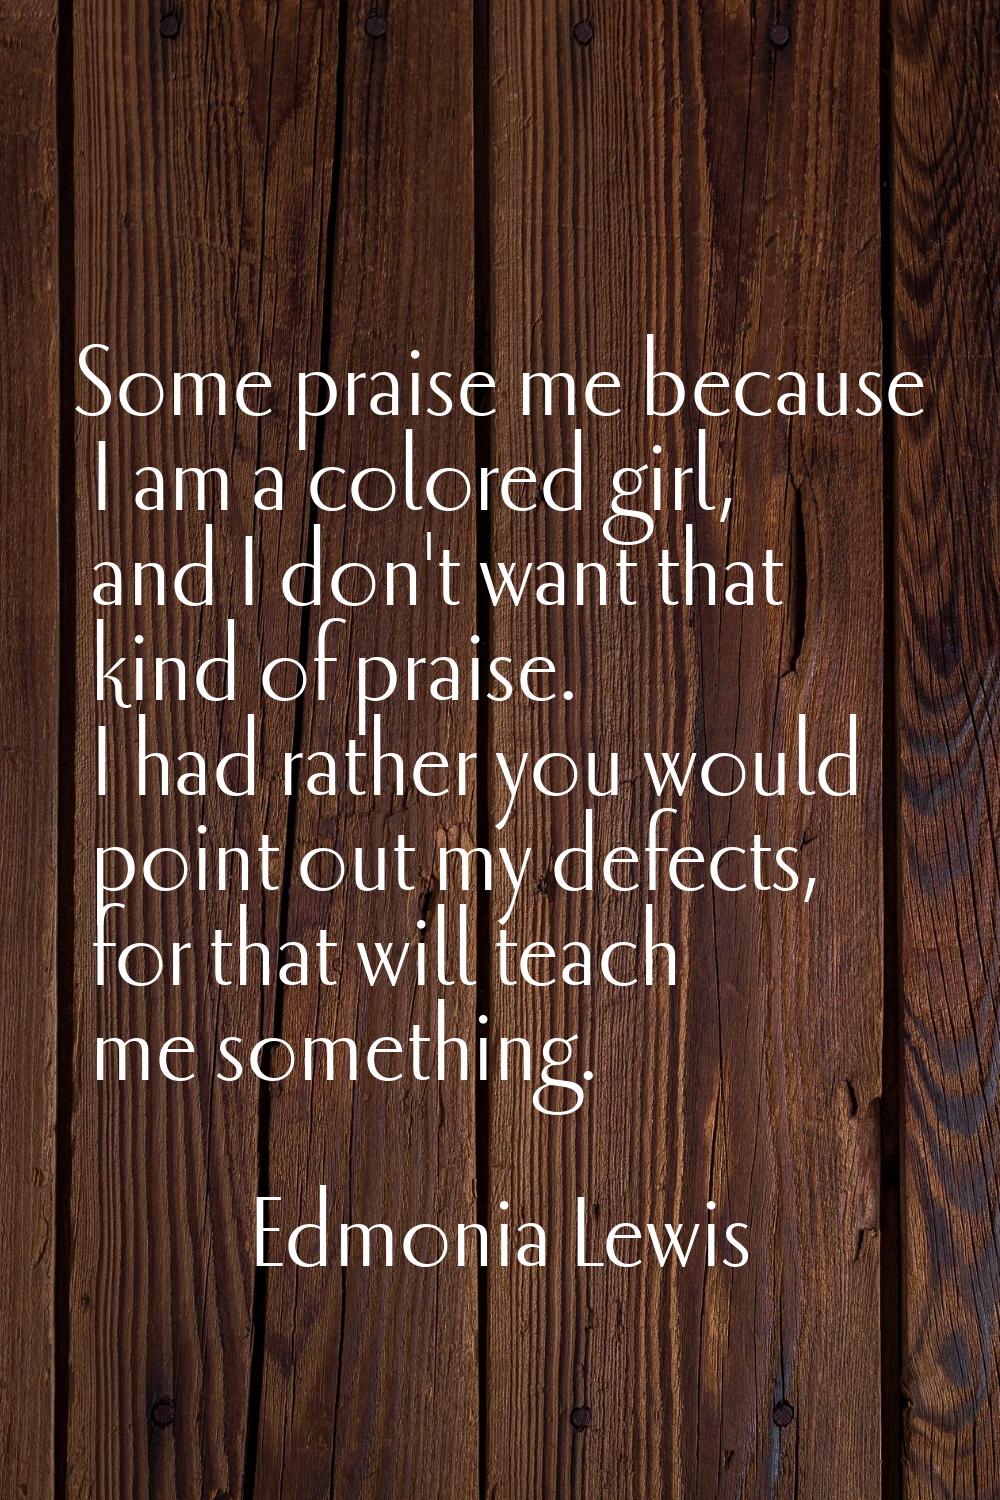 Some praise me because I am a colored girl, and I don't want that kind of praise. I had rather you 